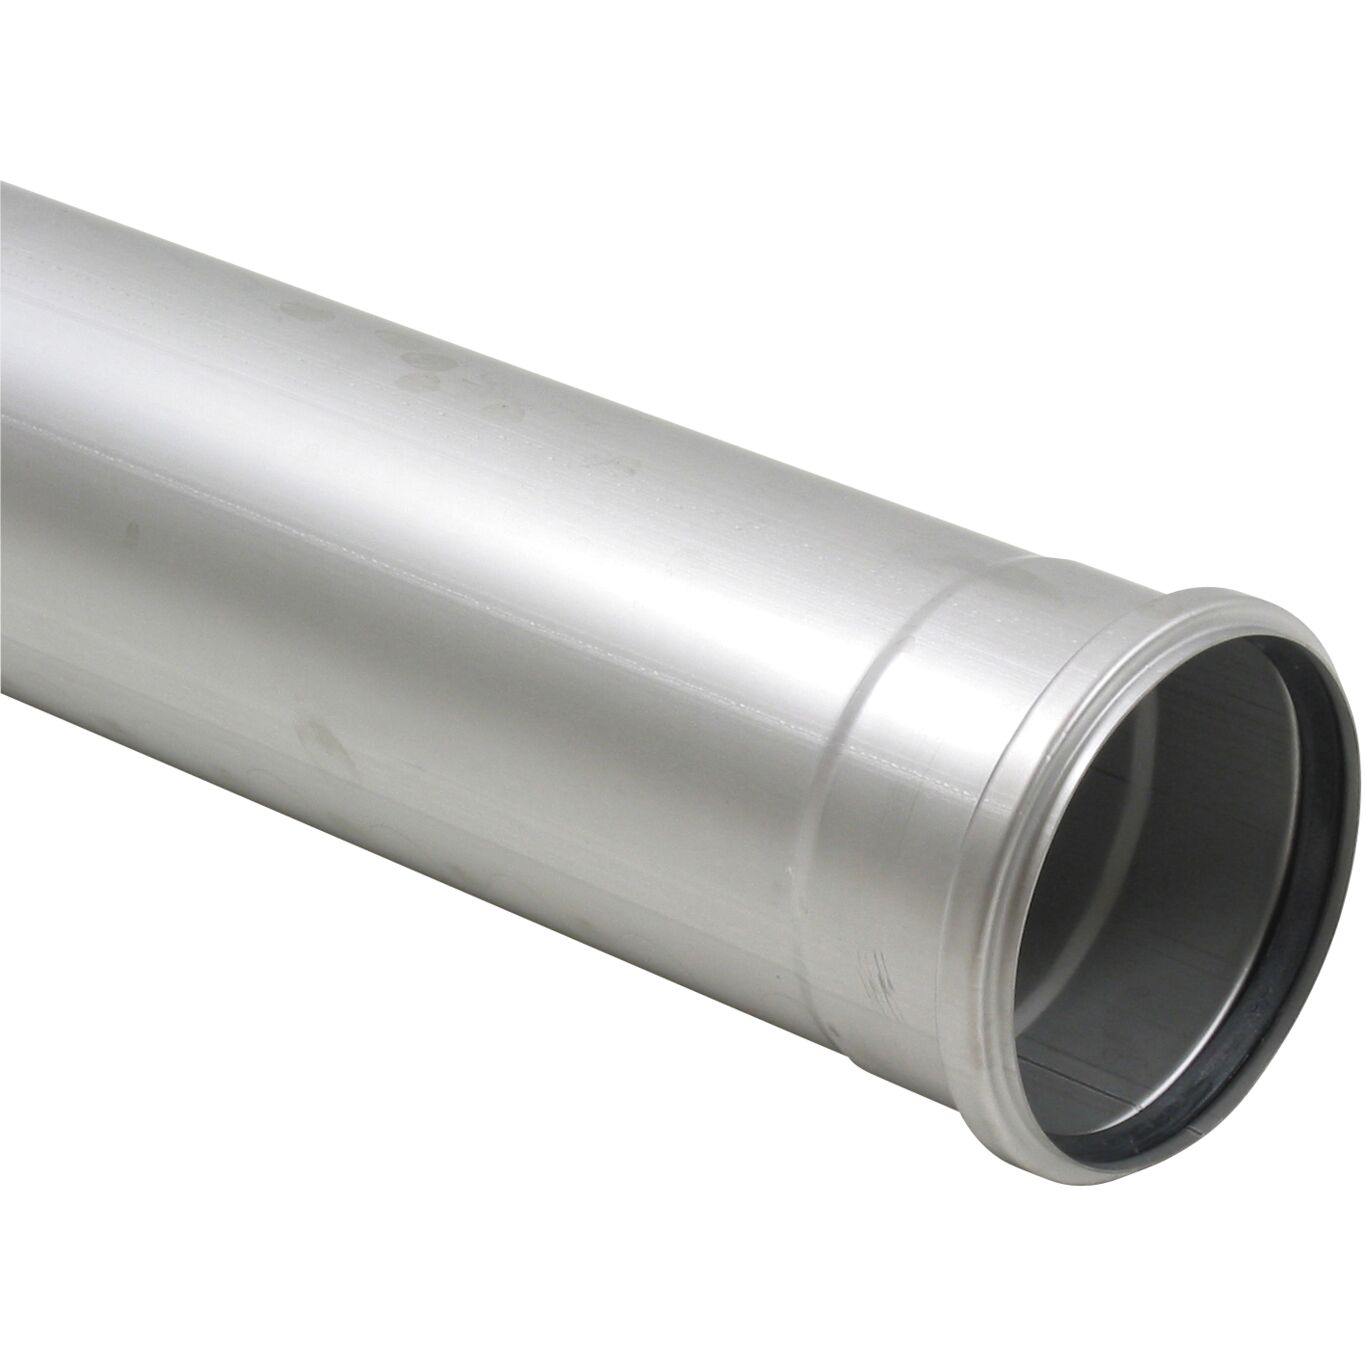 Product Image - Straight pipe